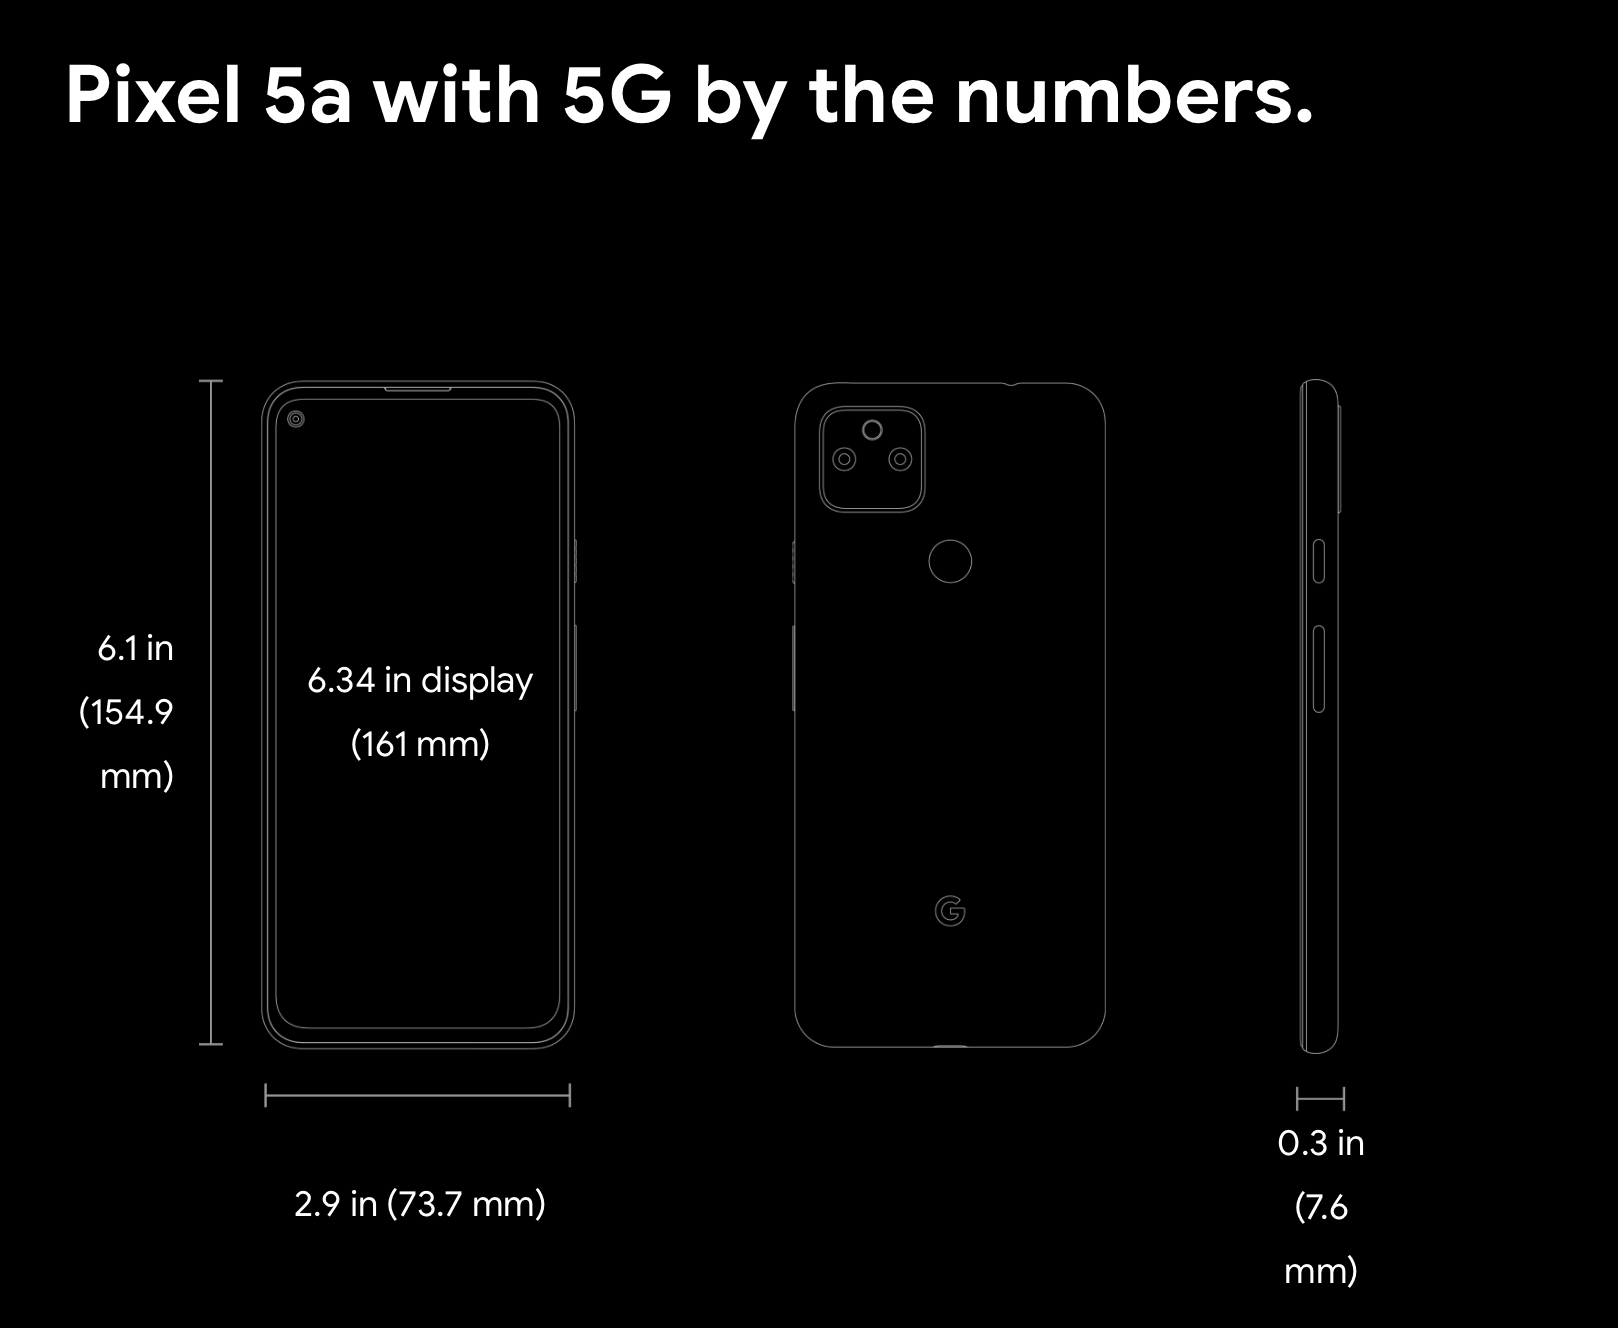 Google Pixel 5a 5G officially announced for $449 in the US & for 